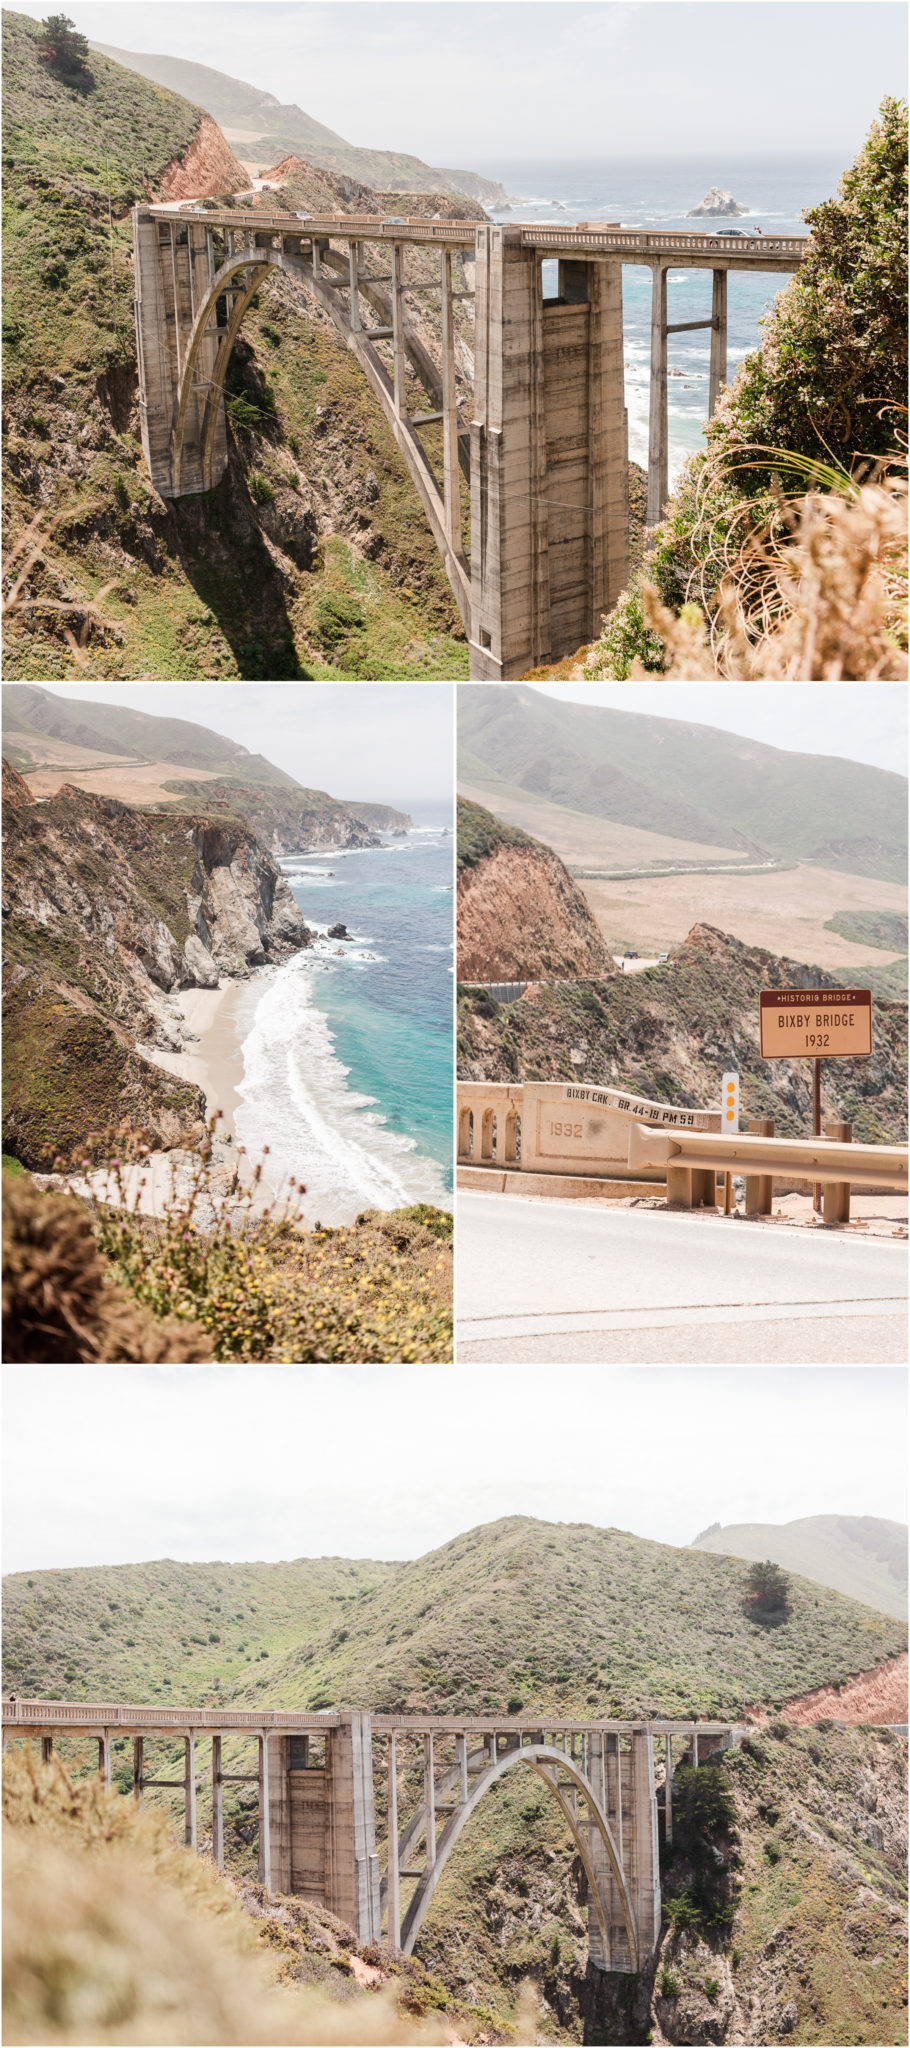 The Bixby Bridge on the road to Big Sur